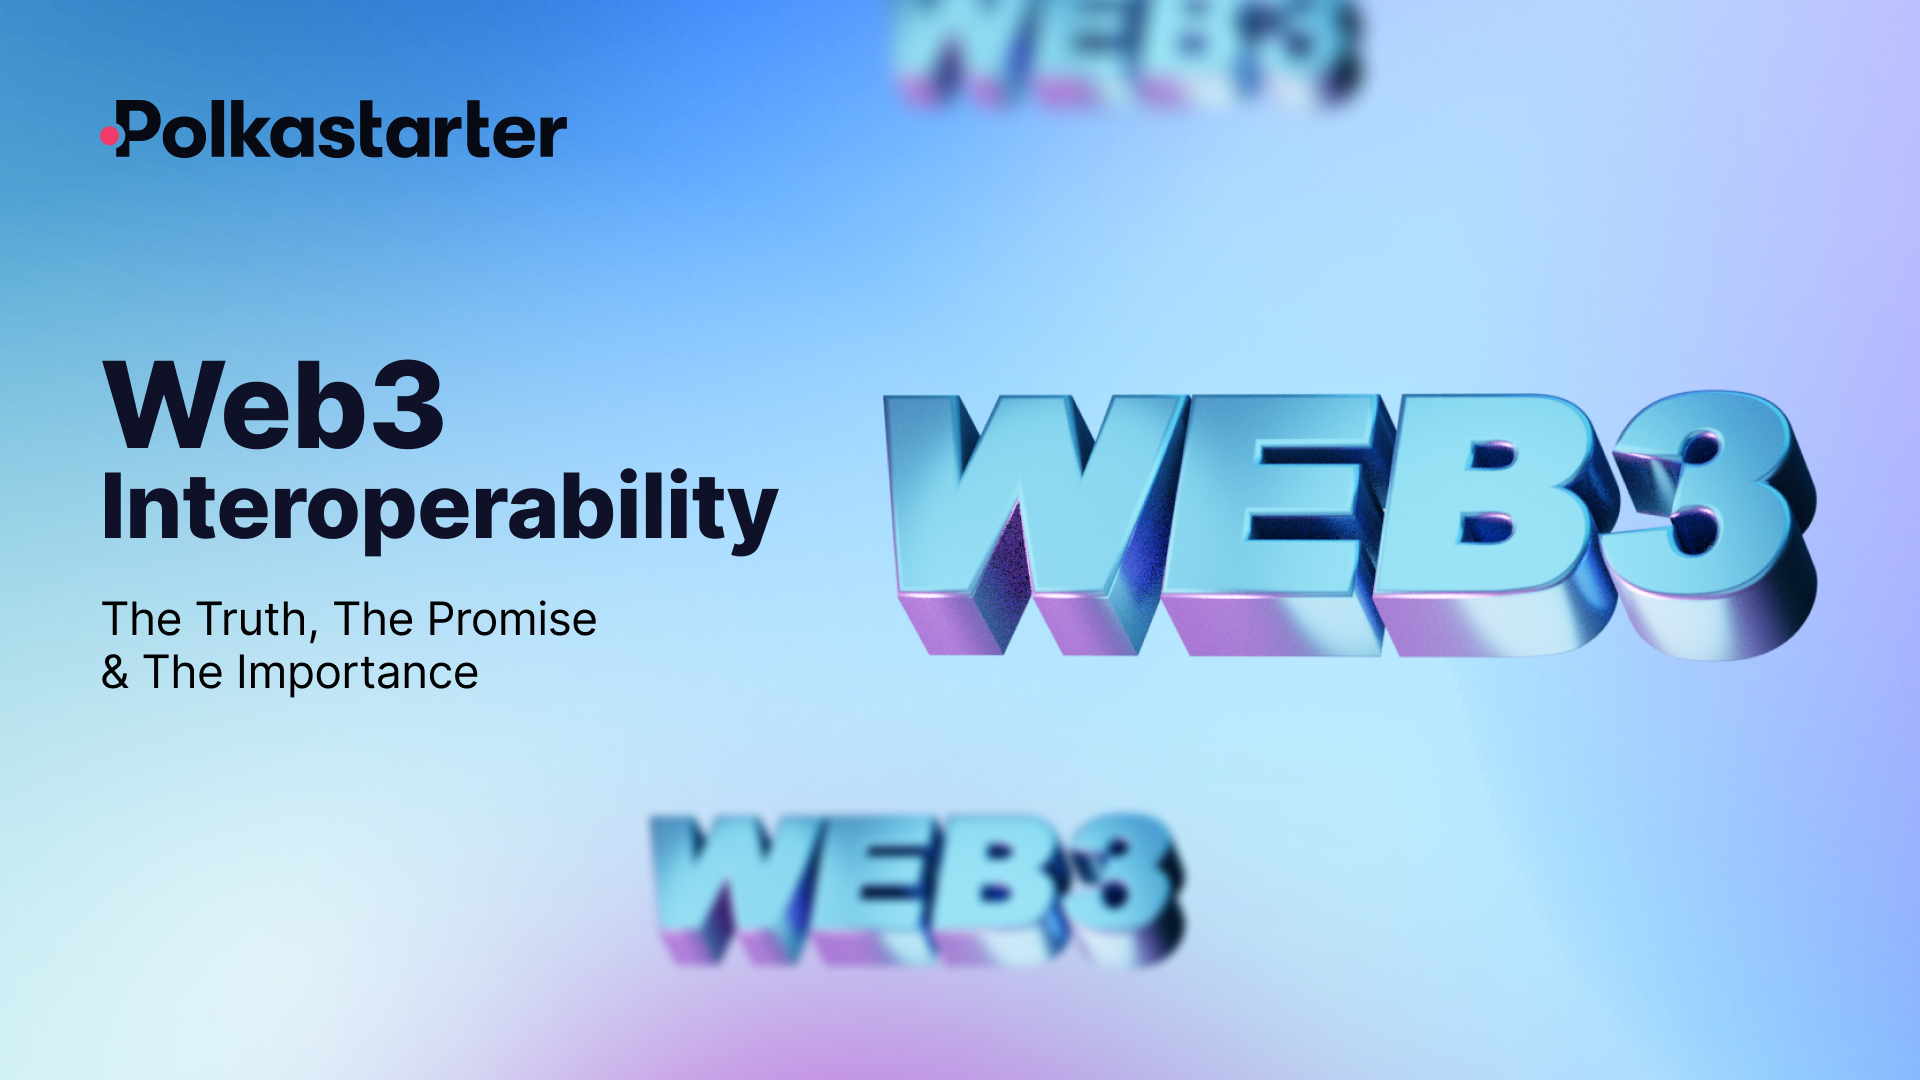 Web3 Interoperability: The Truth, The Promise & The Importance